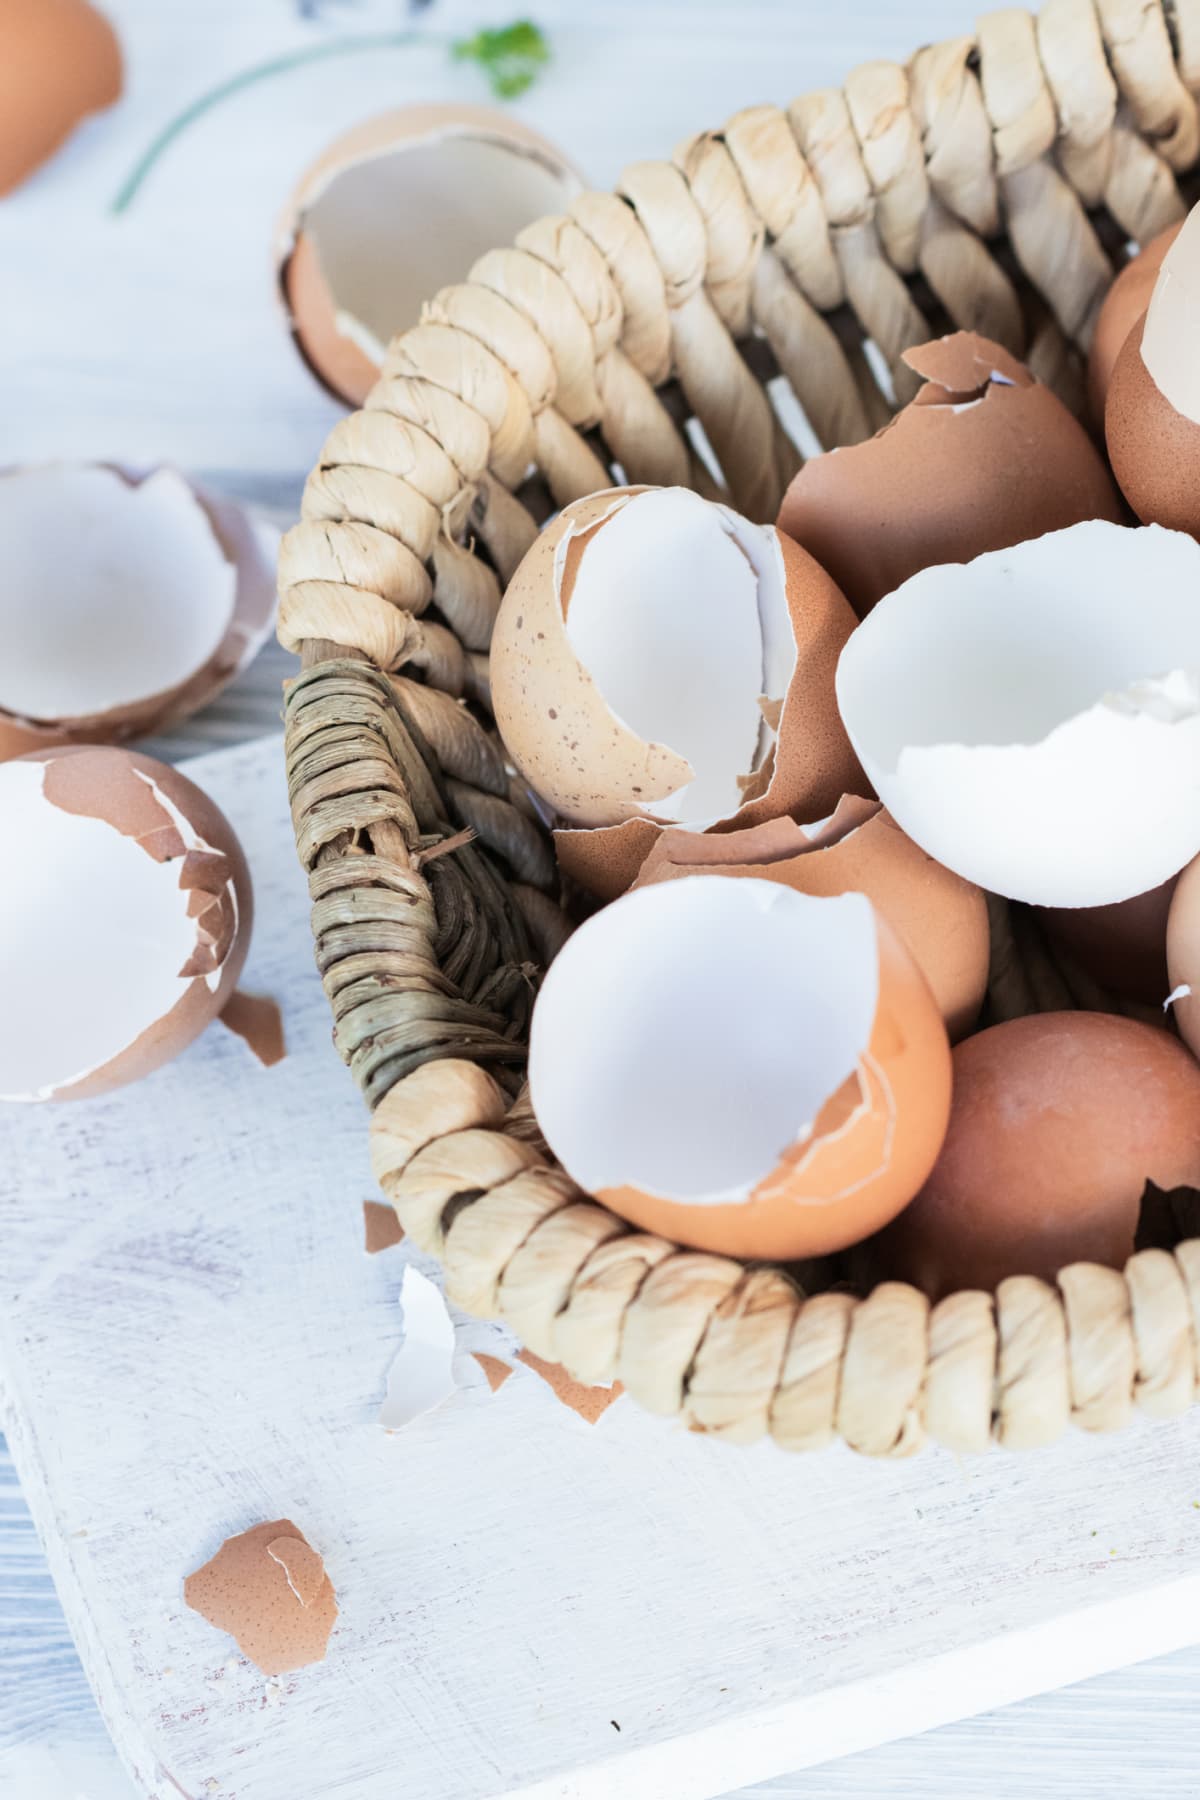 Brown and white eggshells placed in basket on white table, natural calcium source, sustainability concept